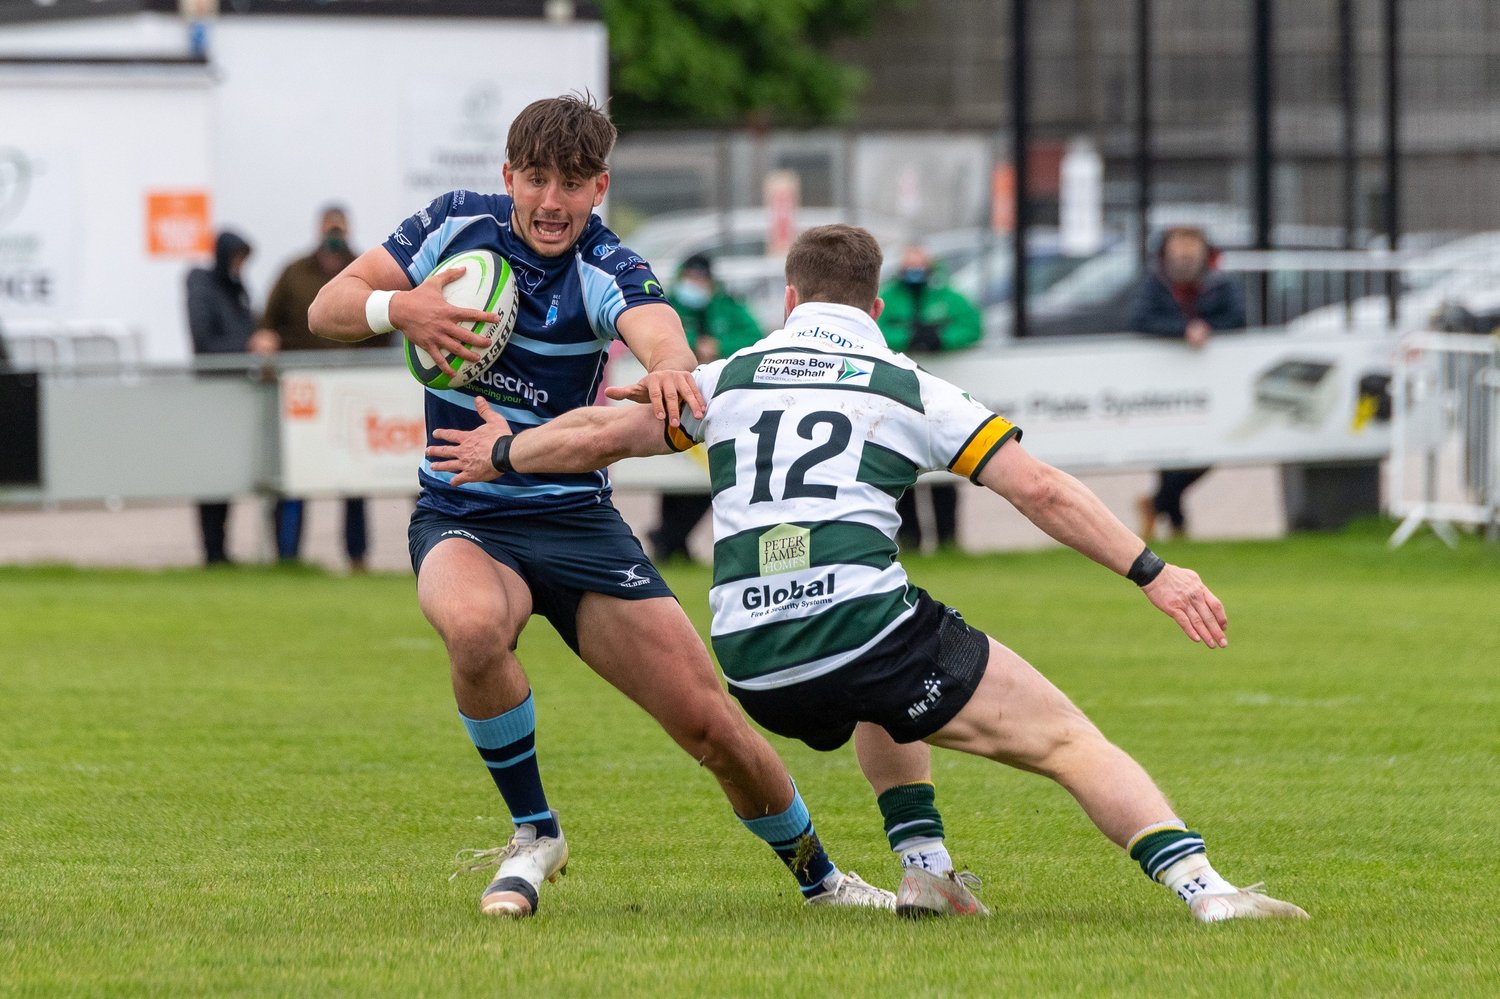 Saints' Ethan Grayson carries for Bedford Blues